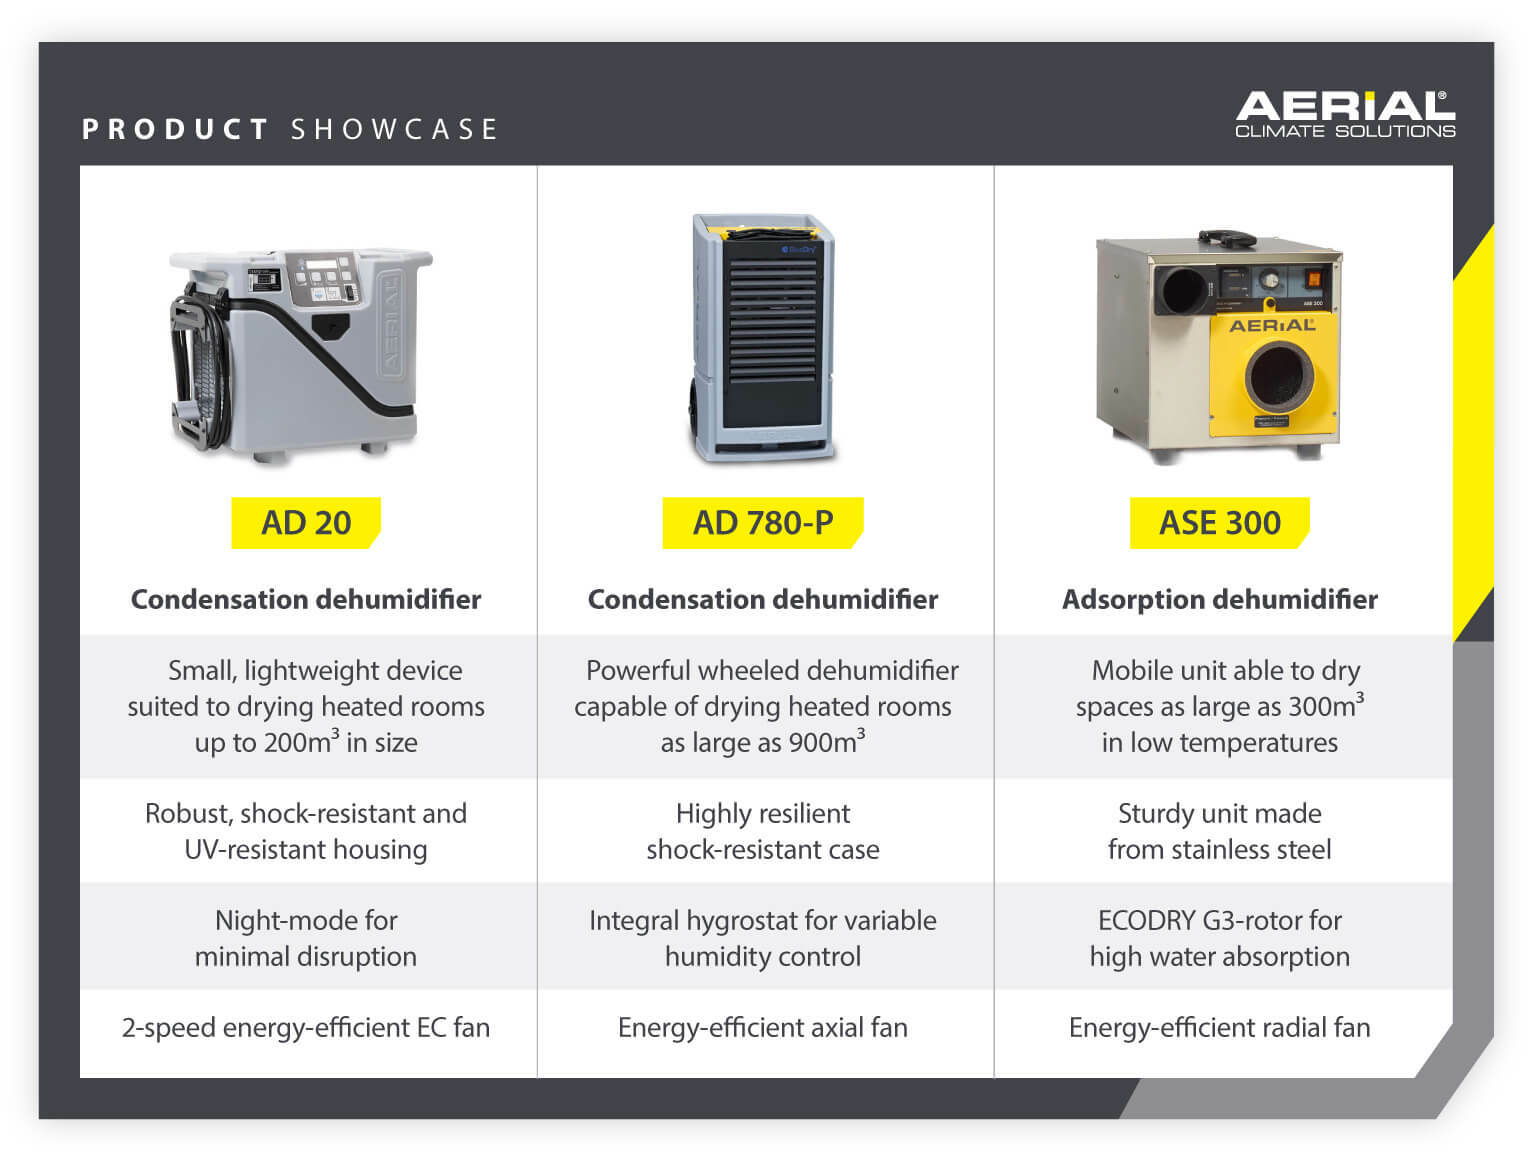 Product showcase: Aerial AD 20 condensation dehumidifier with 2-speed energy-efficient fan, AD 780-P condensation dehumidifier with energy-efficient axial fan, and the ASE 300 with energy-efficient radial fan